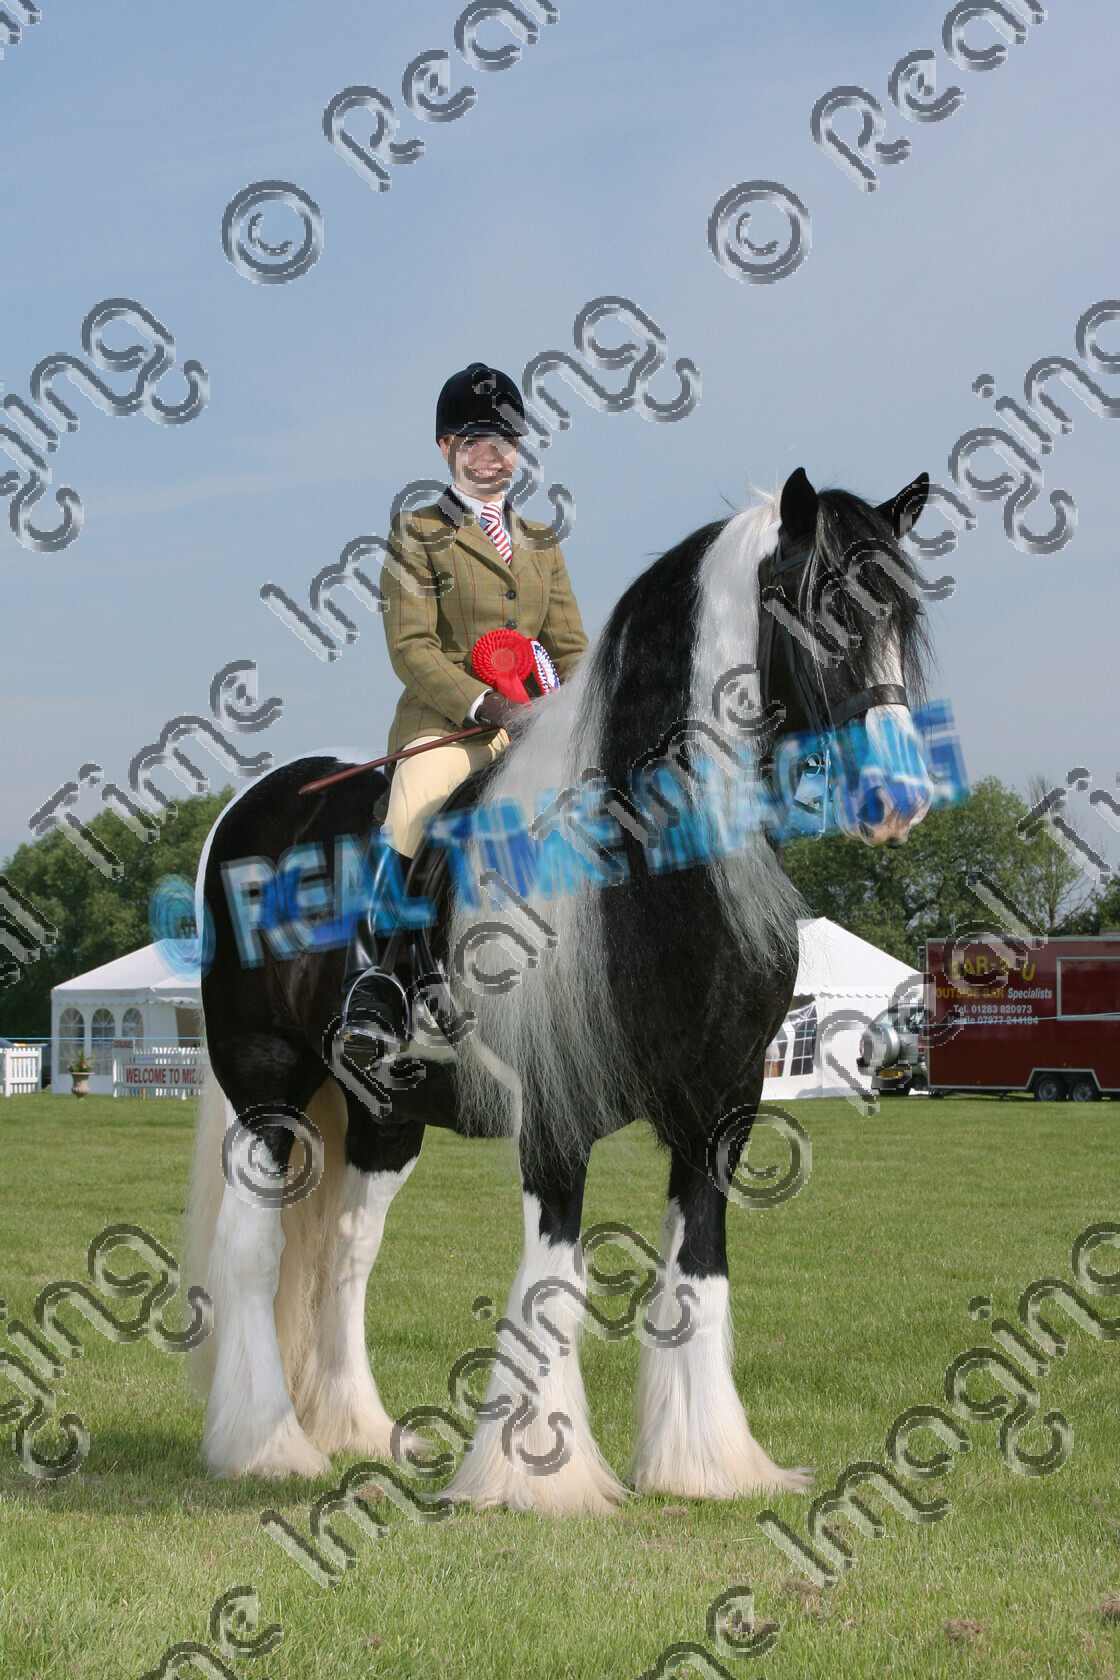 S07-28-01-016 
 Keywords: 710 JASPER BAILEY CHAPS (UK) Ridden Coloured Championship Champion winner win won Owner: Rider: Kirsty Ahern stand coloured colored paint piebald Gelding 3 June 2007 Midland Counties Show Uttoxeter Racecourse upright portrait traditional long mane horse pony Rosette feather